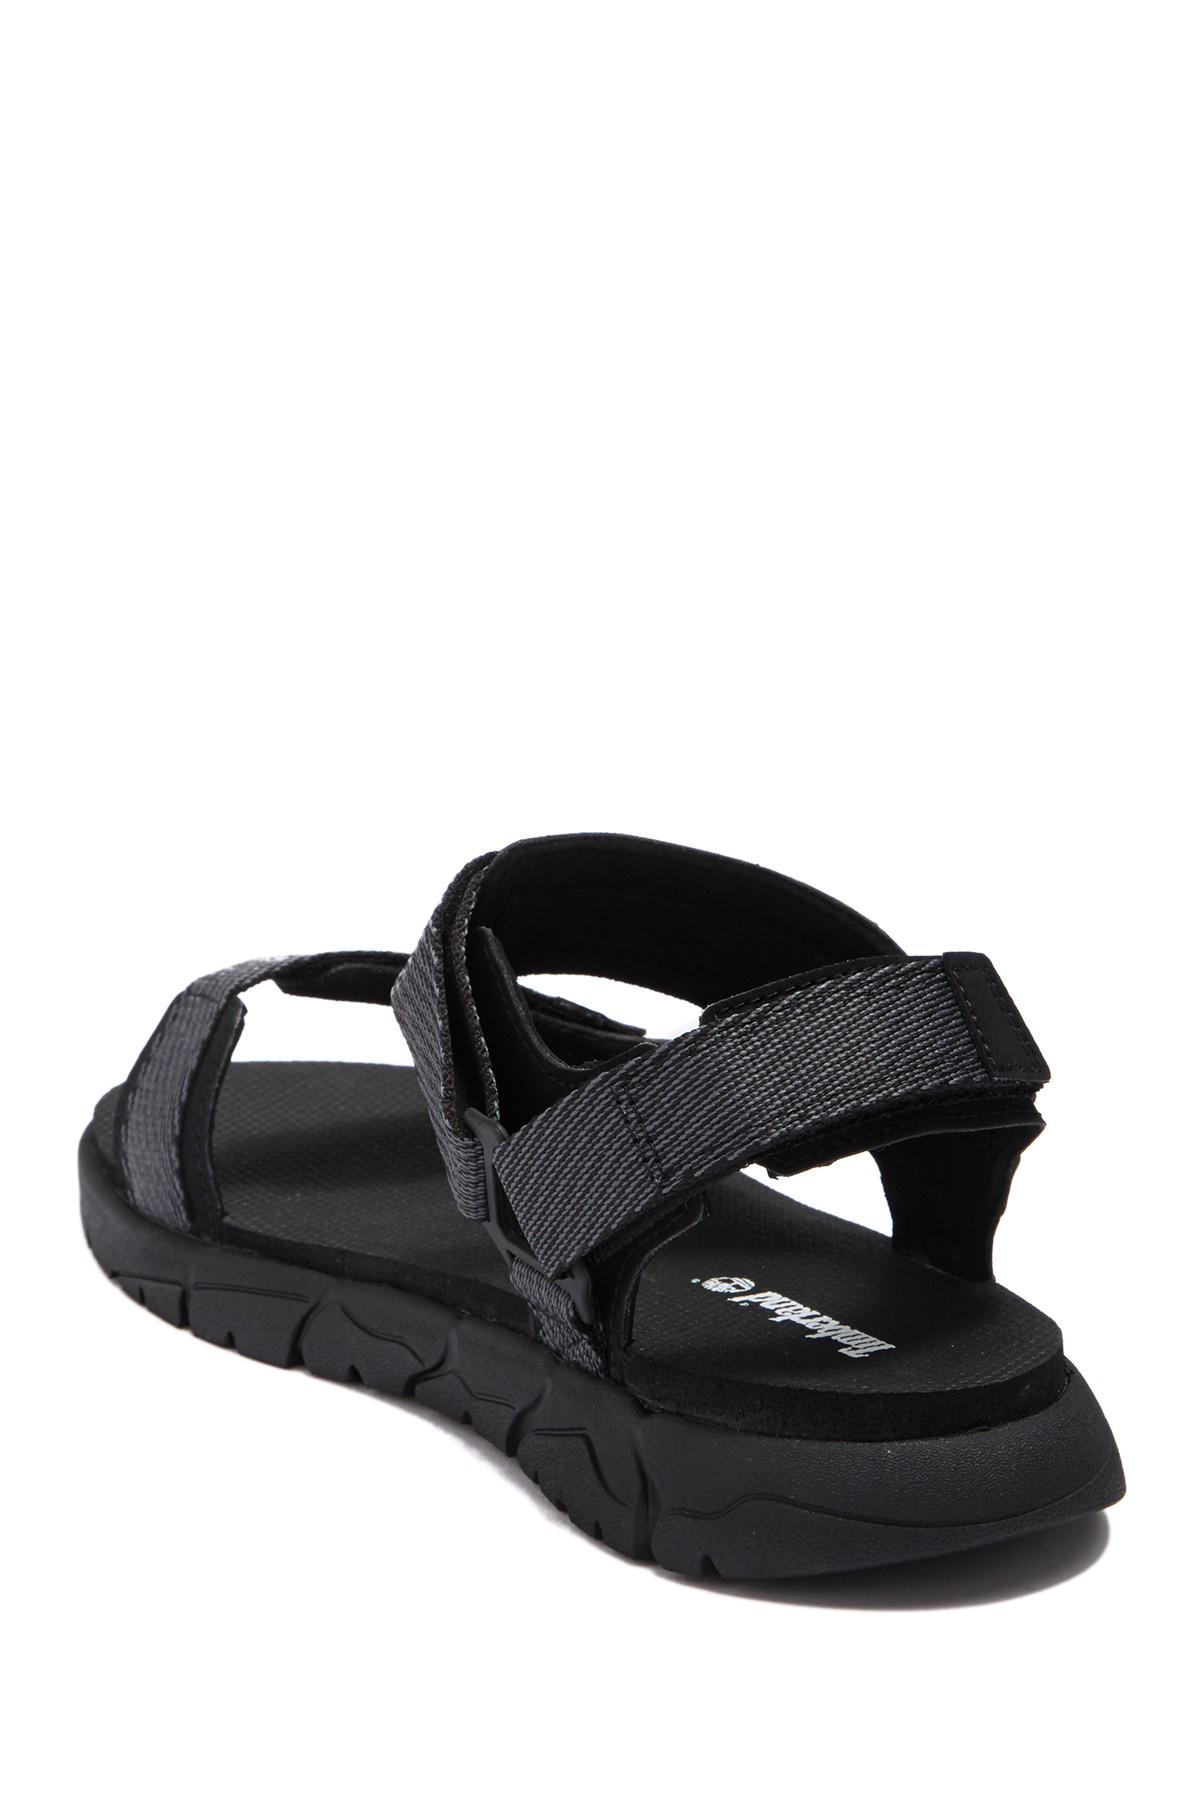 Timberland Windham Trail Sandal in Black for Men - Lyst